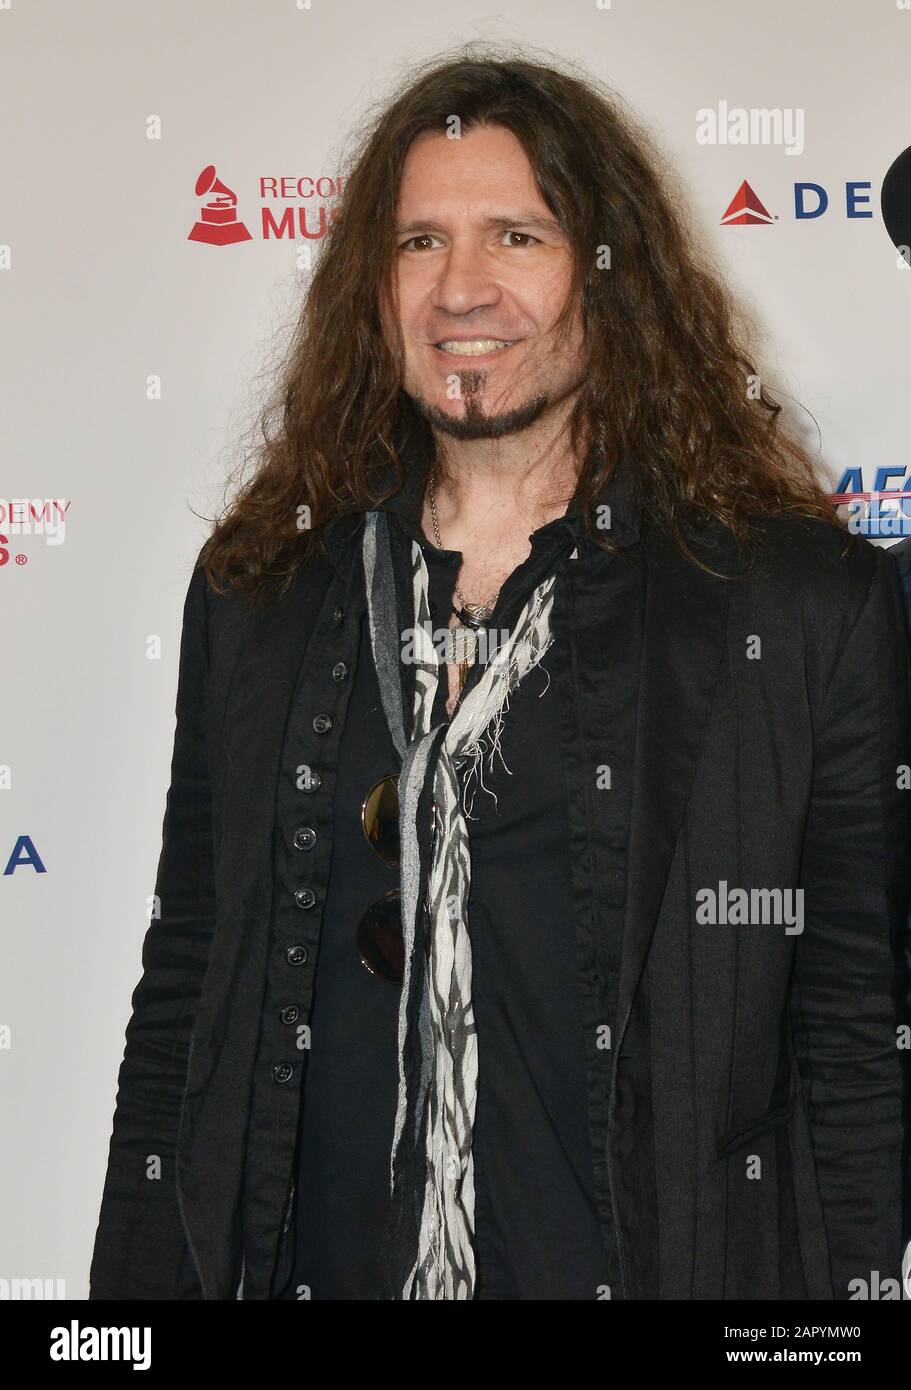 Los Angeles, USA. 24th Jan, 2020. Phil X - BonJovi attends MusiCares Person of the Year honoring Aerosmith at West Hall at Los Angeles Convention Center on January 24, 2020 in Los Angeles, California. Credit: Tsuni/USA/Alamy Live News Stock Photo